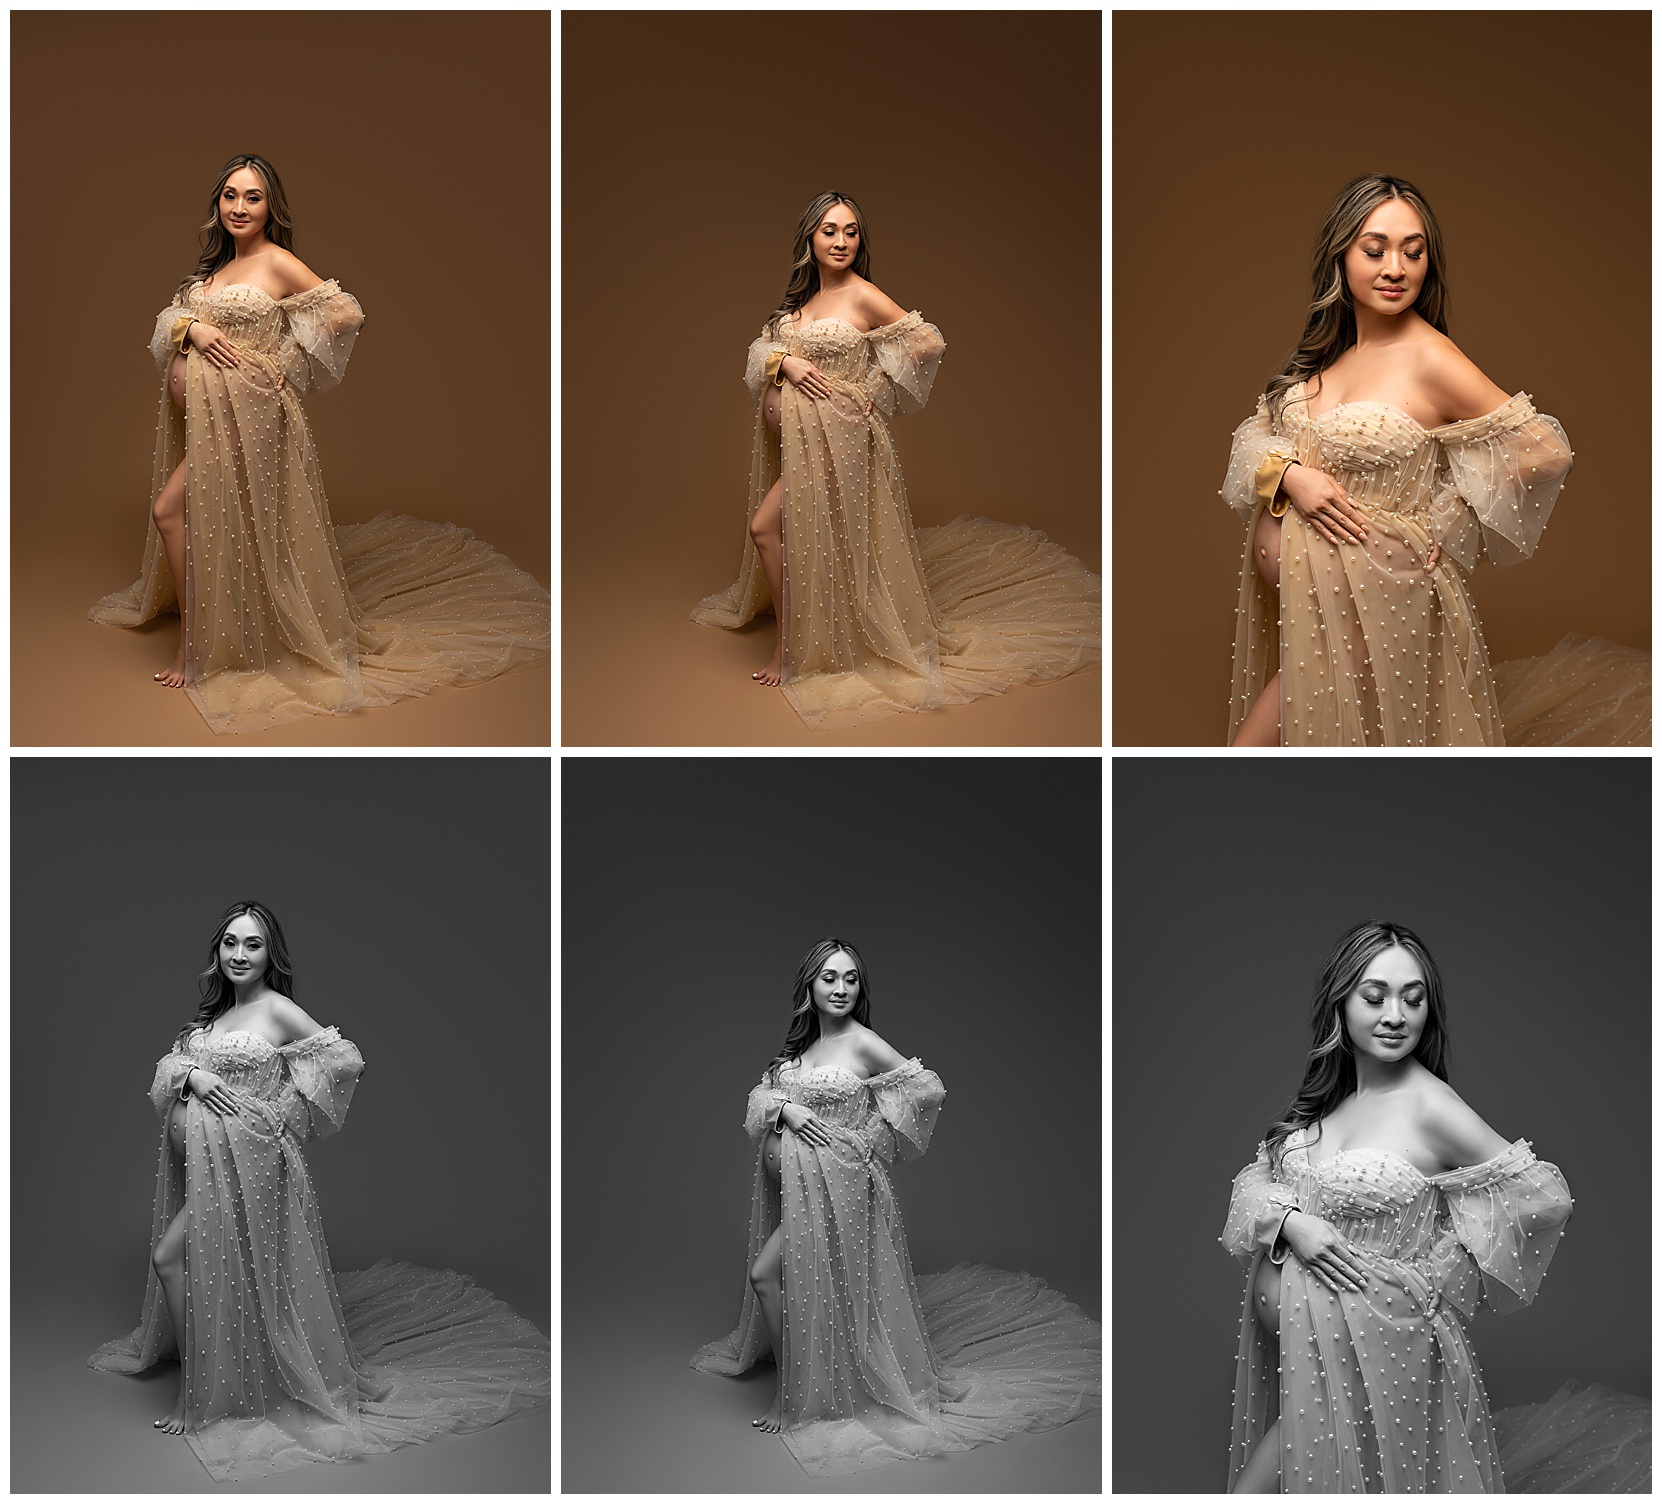 An austin maternity photo montage of a young mom in a cream-colored, sheer gown posing her baby bump in front of a plain, brown background